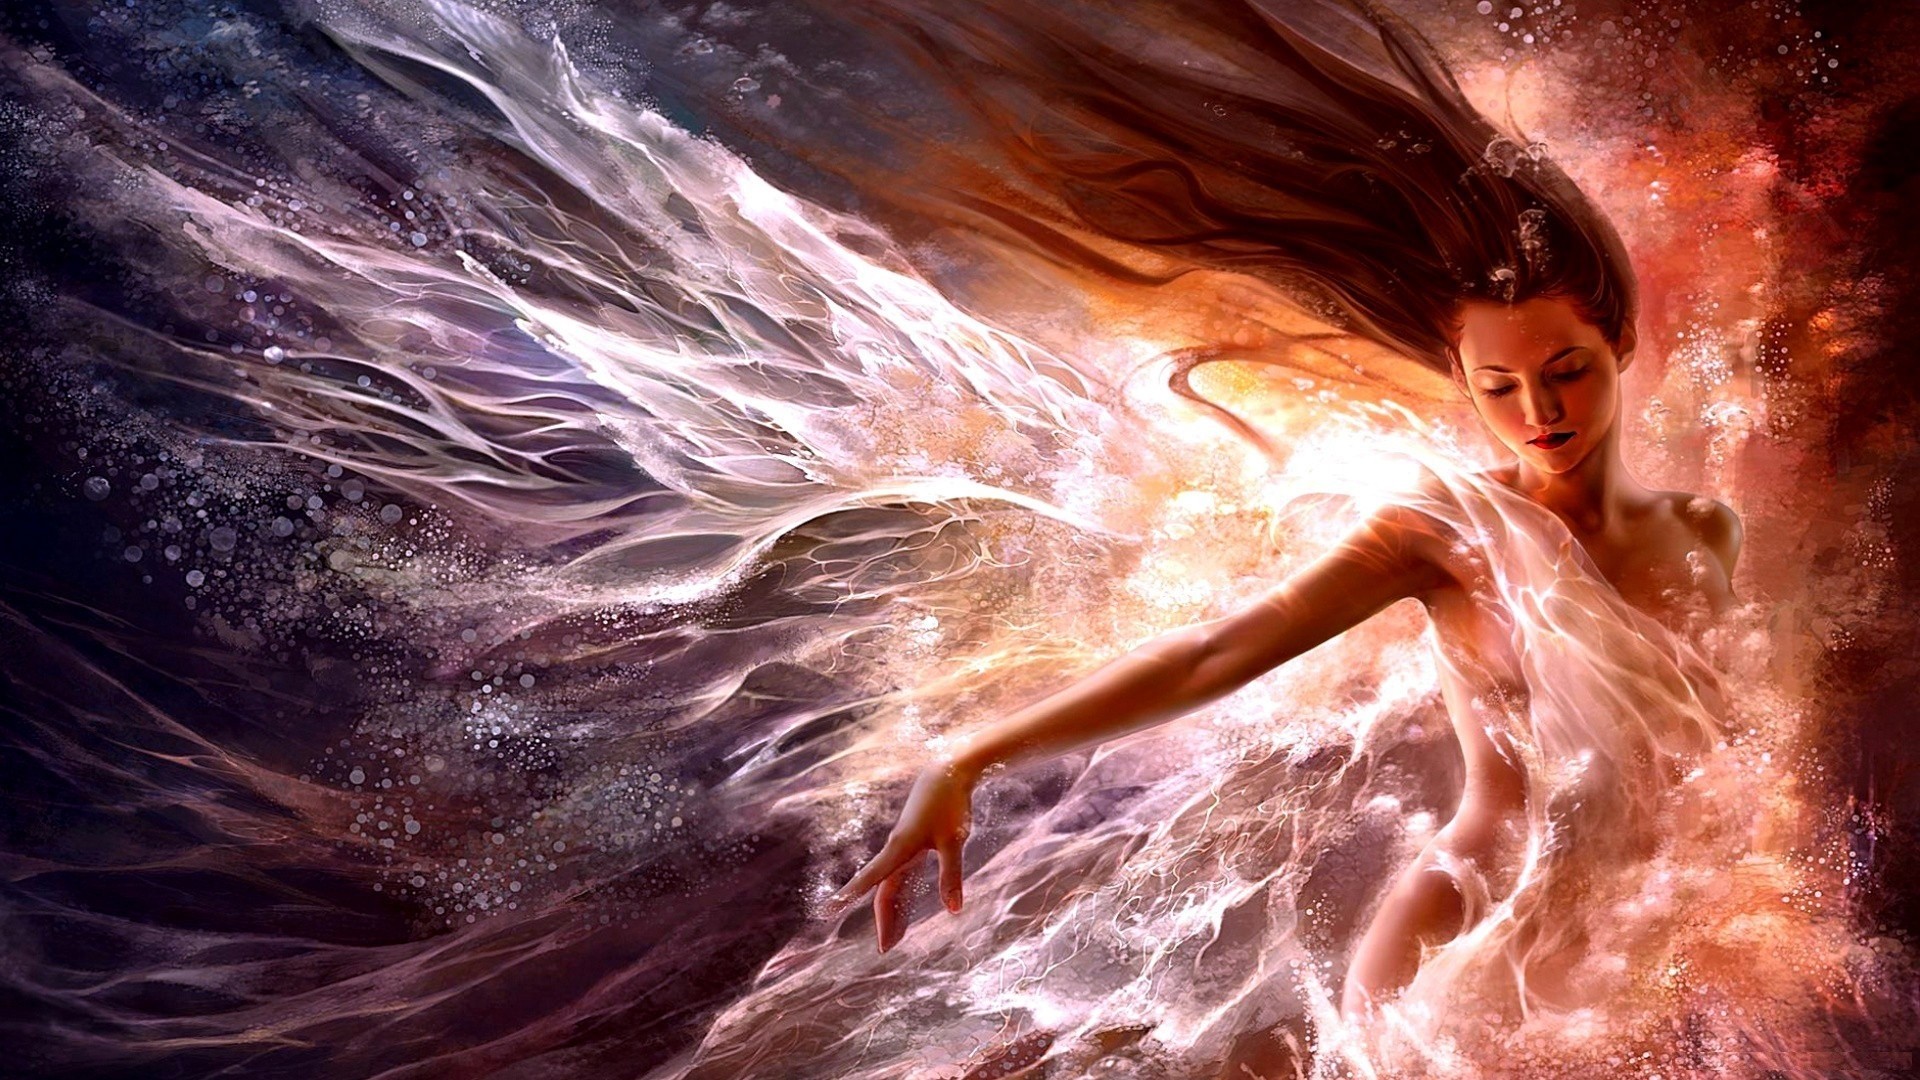 1920x1080 Fairy Pics Wallpapers (47 Wallpapers)